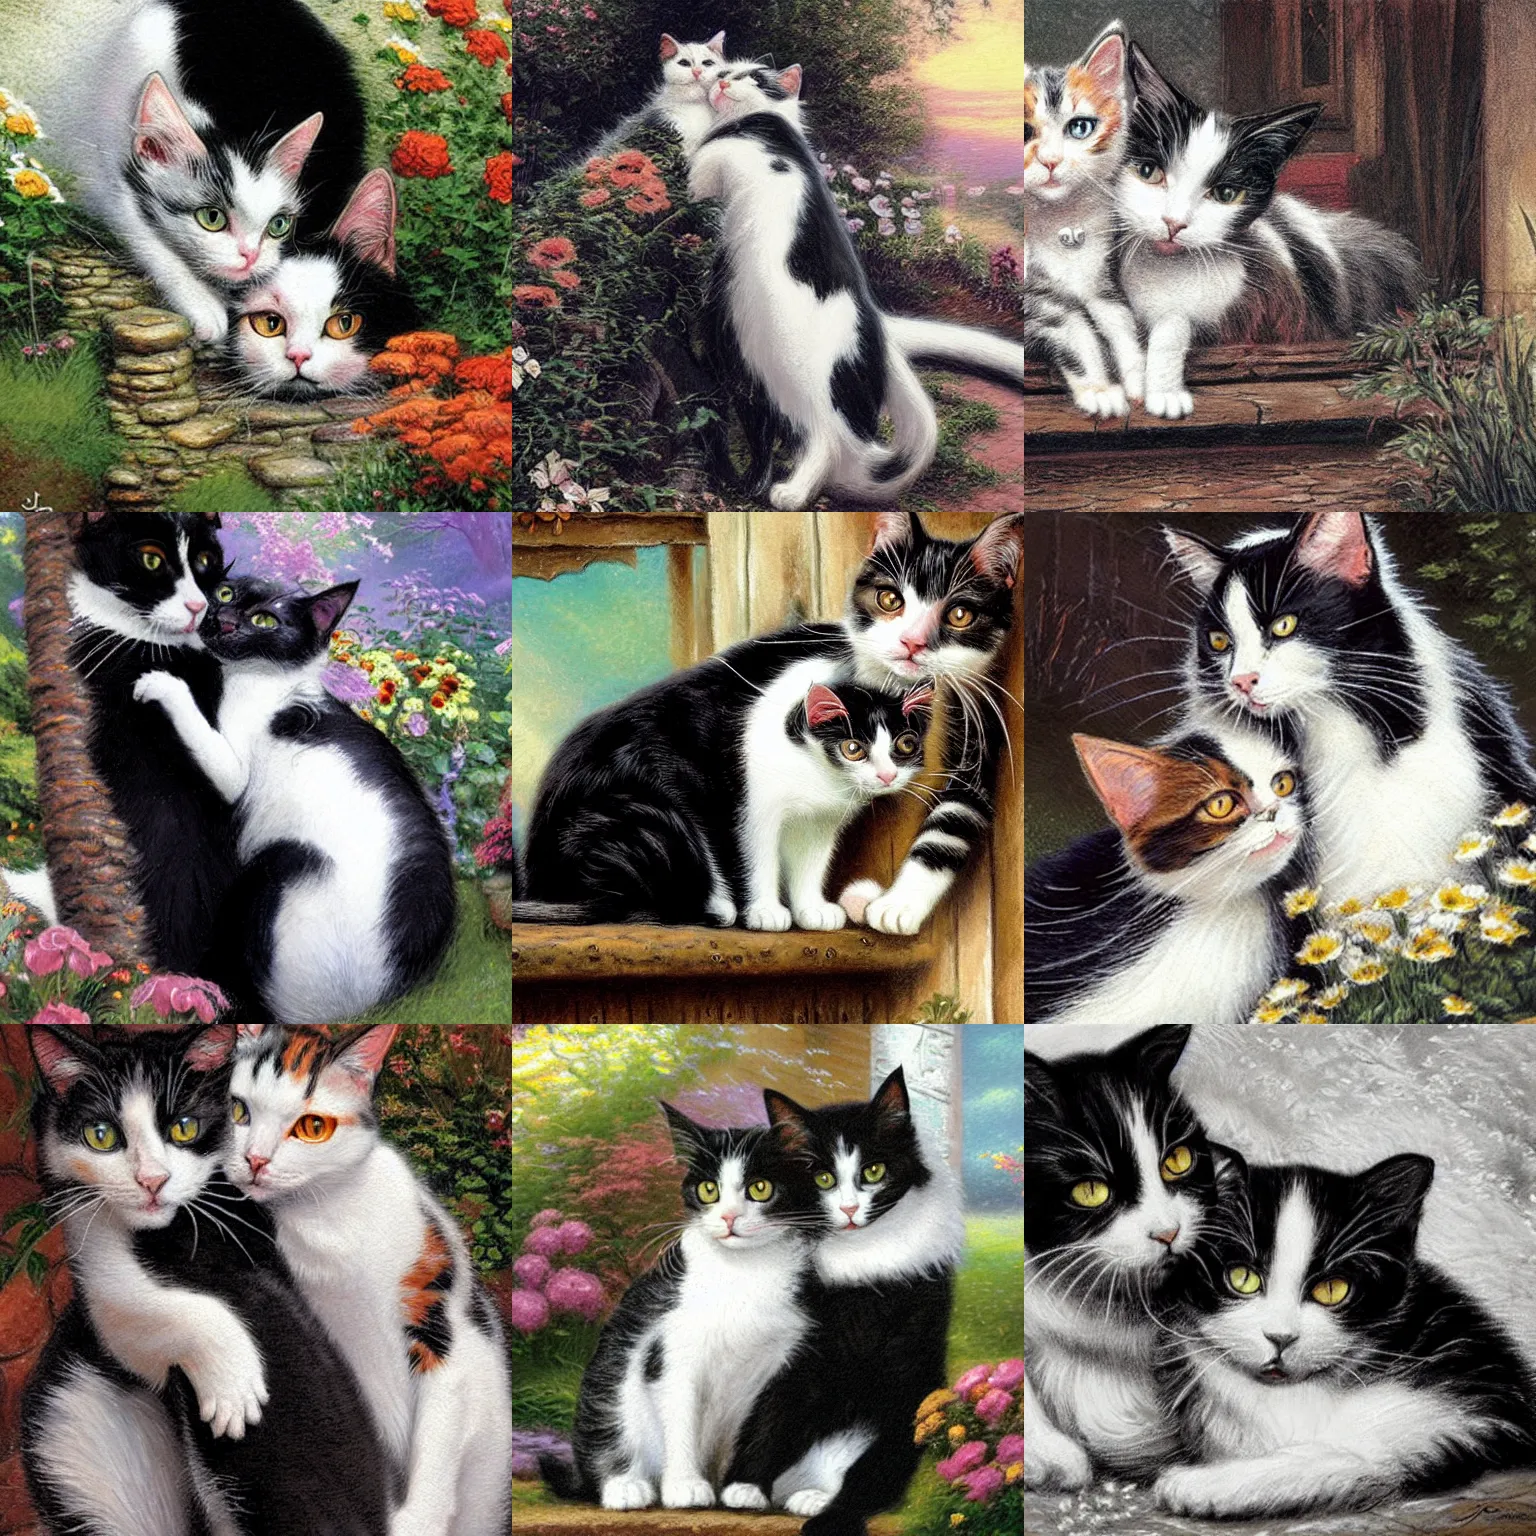 Prompt: a black-and-white cat and a calico cat hugging each other, illustrated by James Gurney, Laurie Greasely, Thomas Kinkade, highly detailed environment